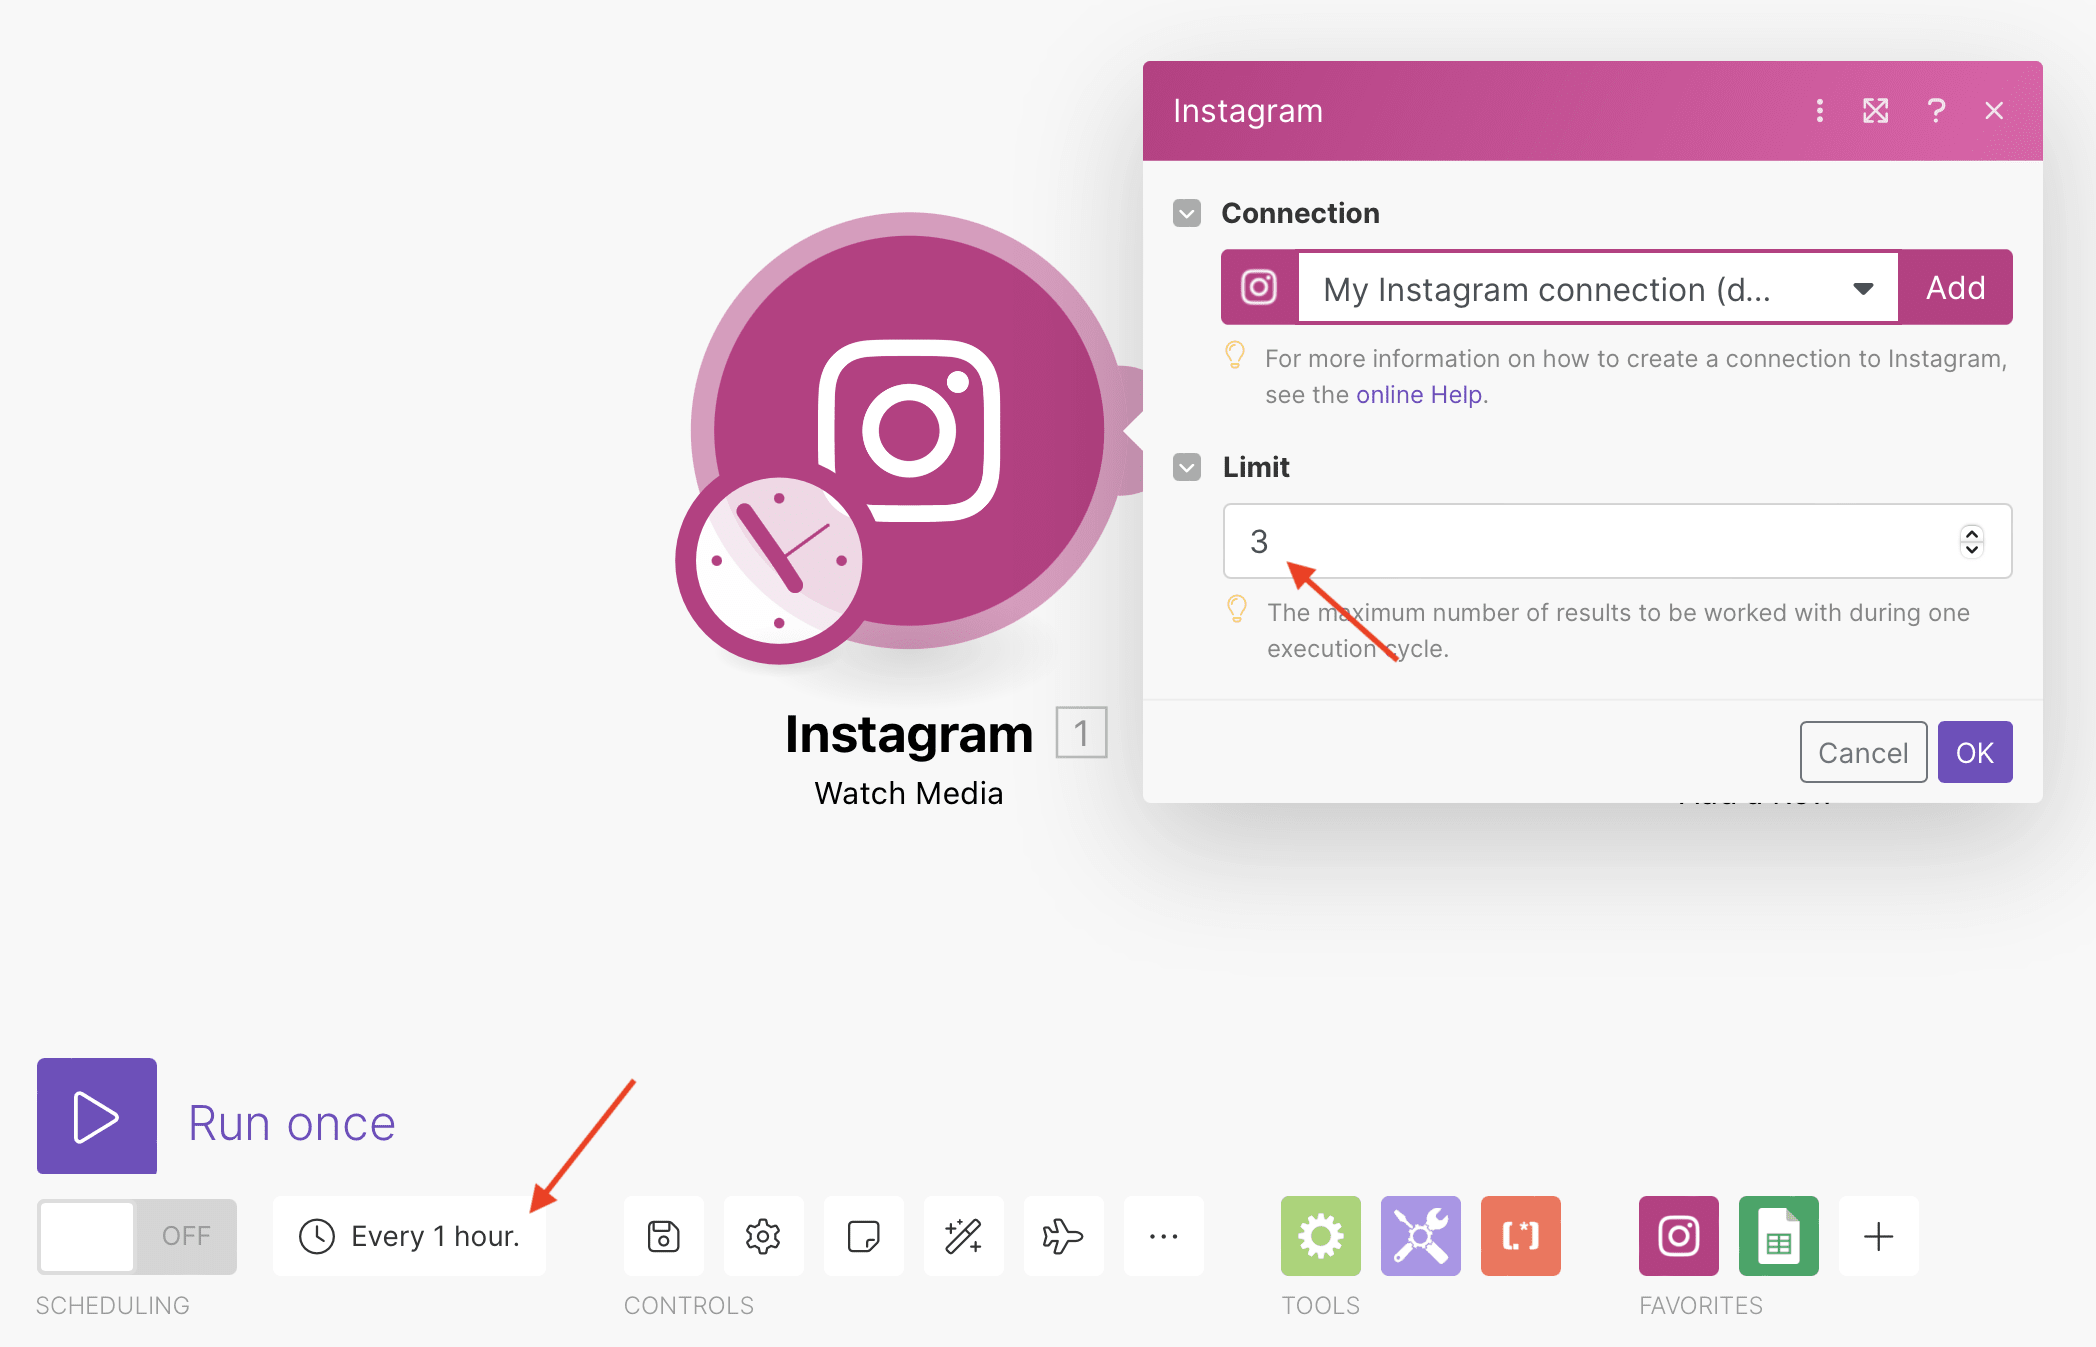 Screenshot of Make Instagram module with red arrows pointing to limit and scheduling options